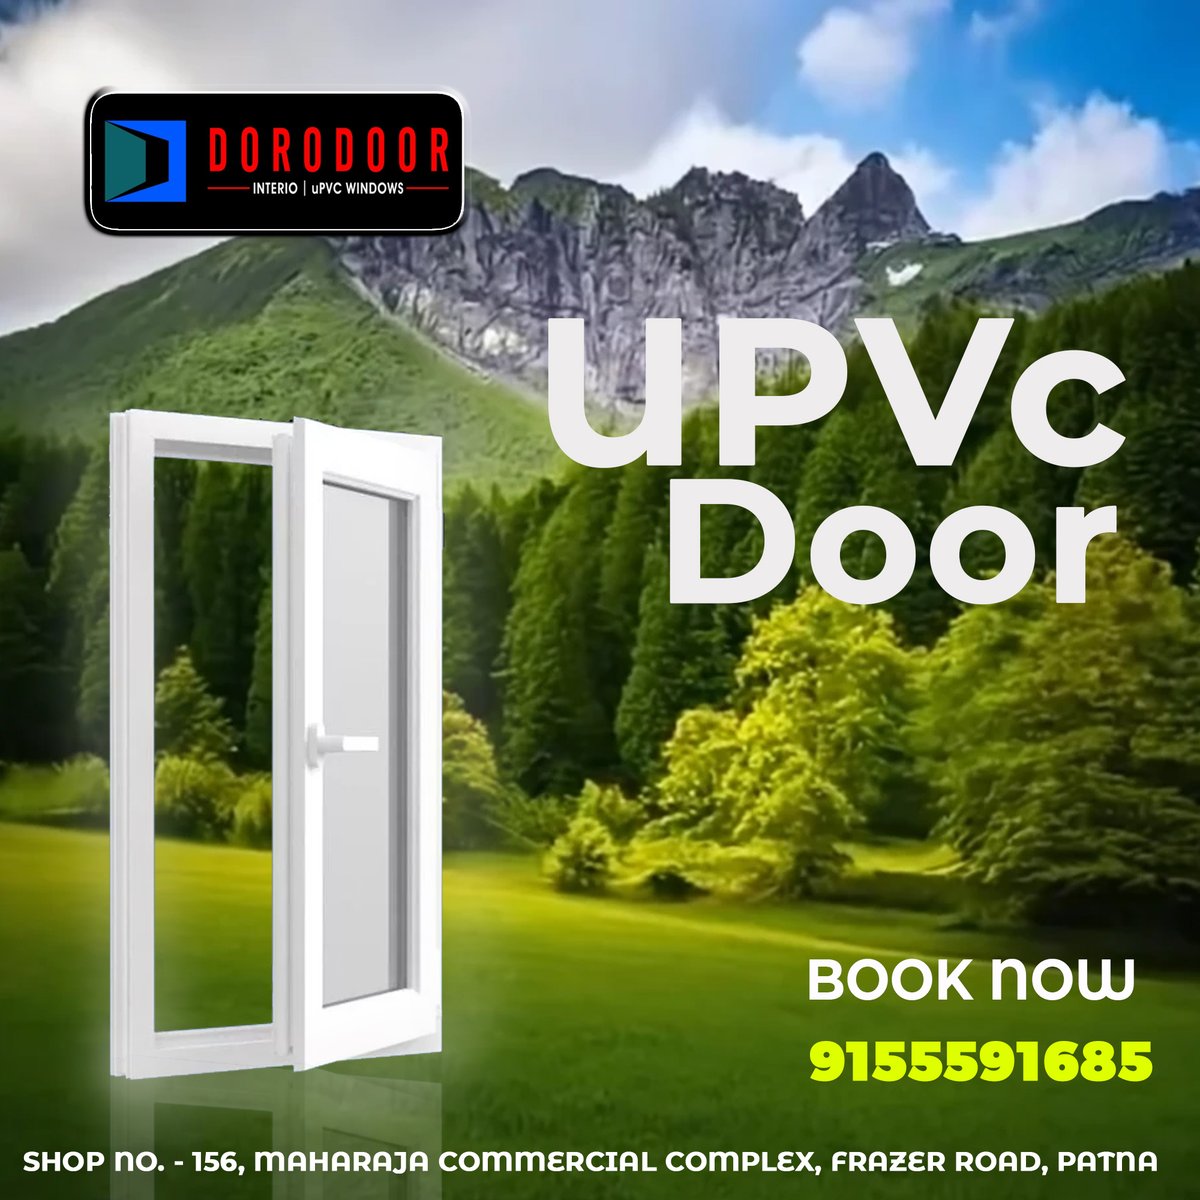 Upgrade your home's security and style with Dorodoor's premium UPVC doors! 🚪✨ Experience durability, elegance, and peace of mind with our top-notch designs. #Dorodoor #UPVCdoors #HomeSecurity #StylishLiving #Durability #PremiumQuality #SecureLiving #ModernDesign #UpgradeToday